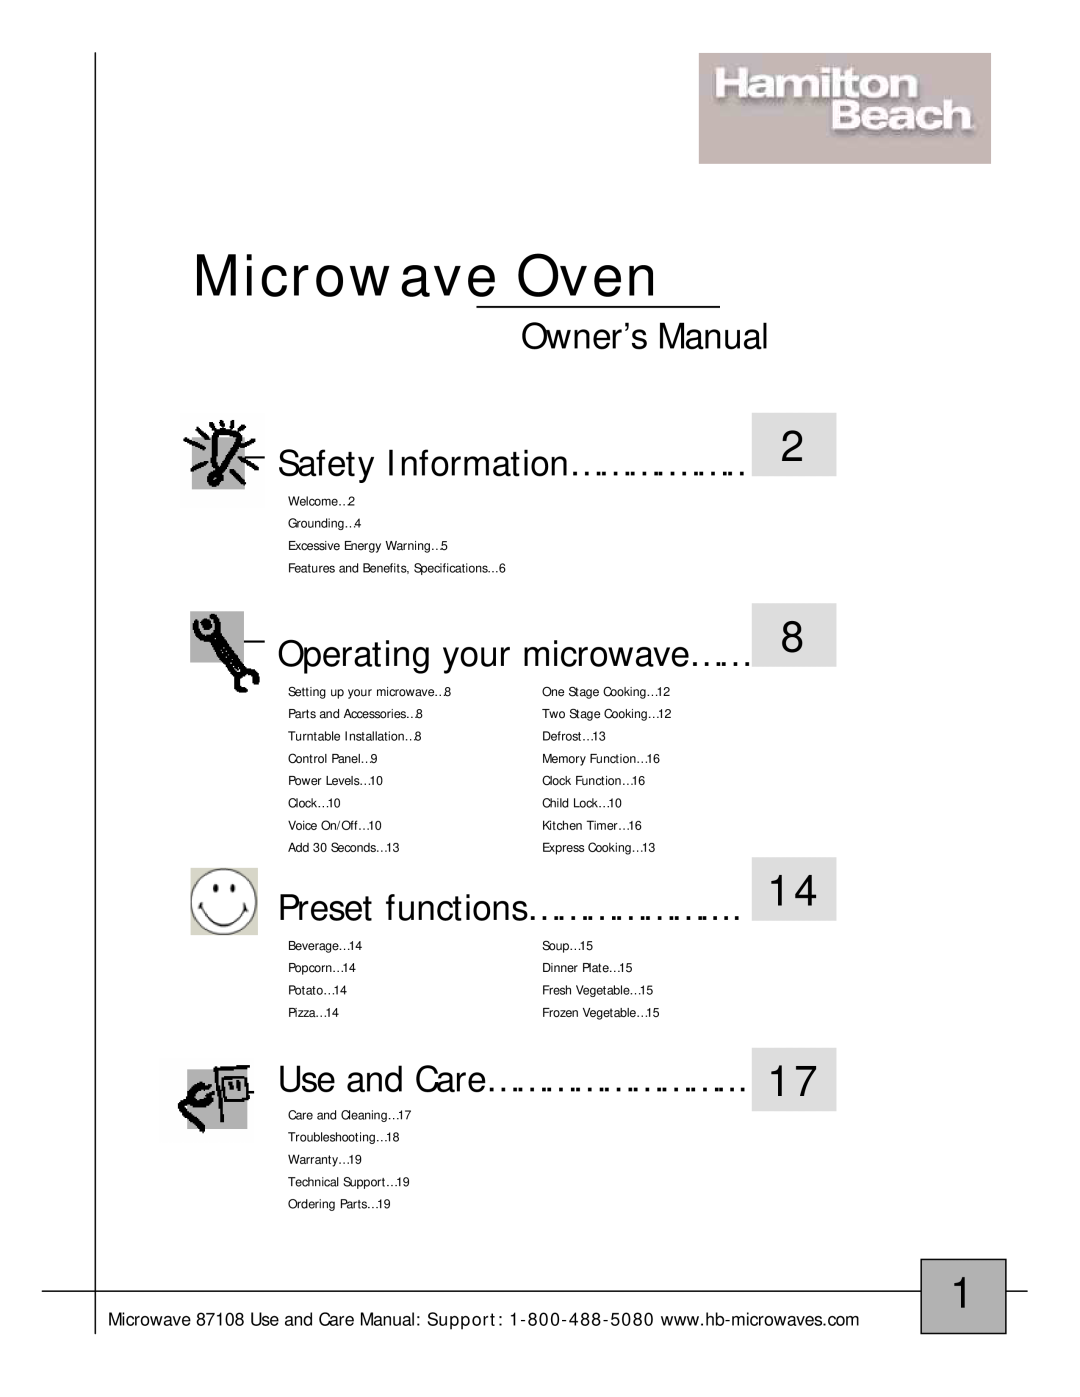 Hamilton Beach 87108 owner manual Operating your microwave……, Preset functions………………, Use and Care……………………, Microwave Oven 